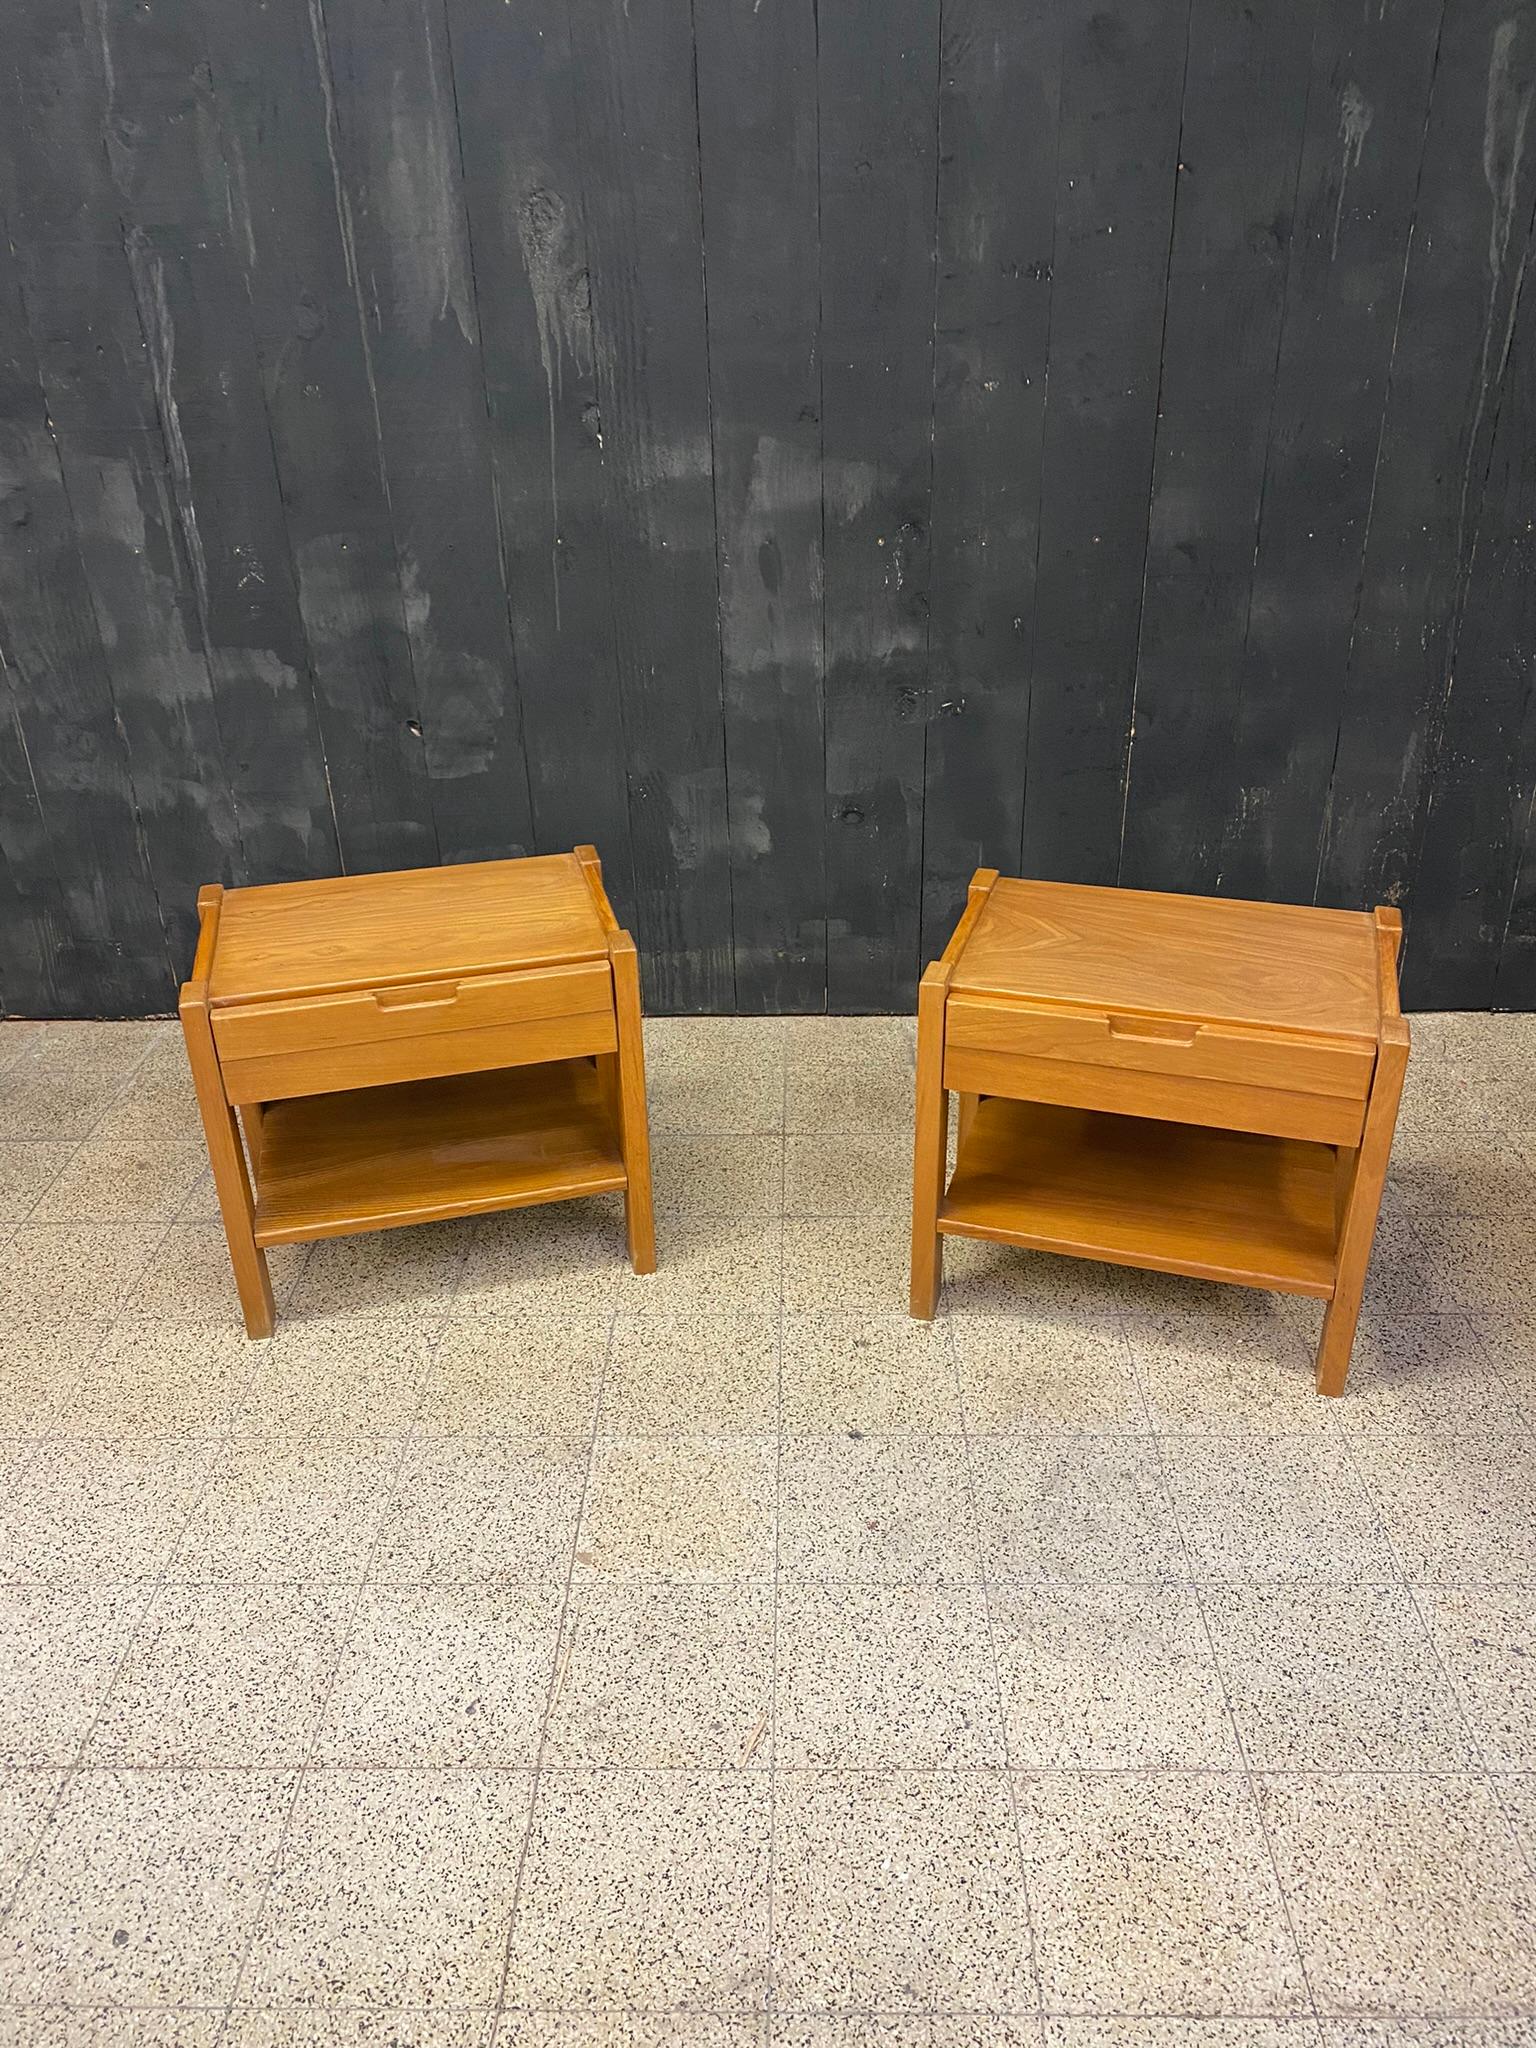 Maison Regain two Bedside Tables in Solid Elm, circa 1960 Pierre Chapo Style In Excellent Condition For Sale In Saint-Ouen, FR